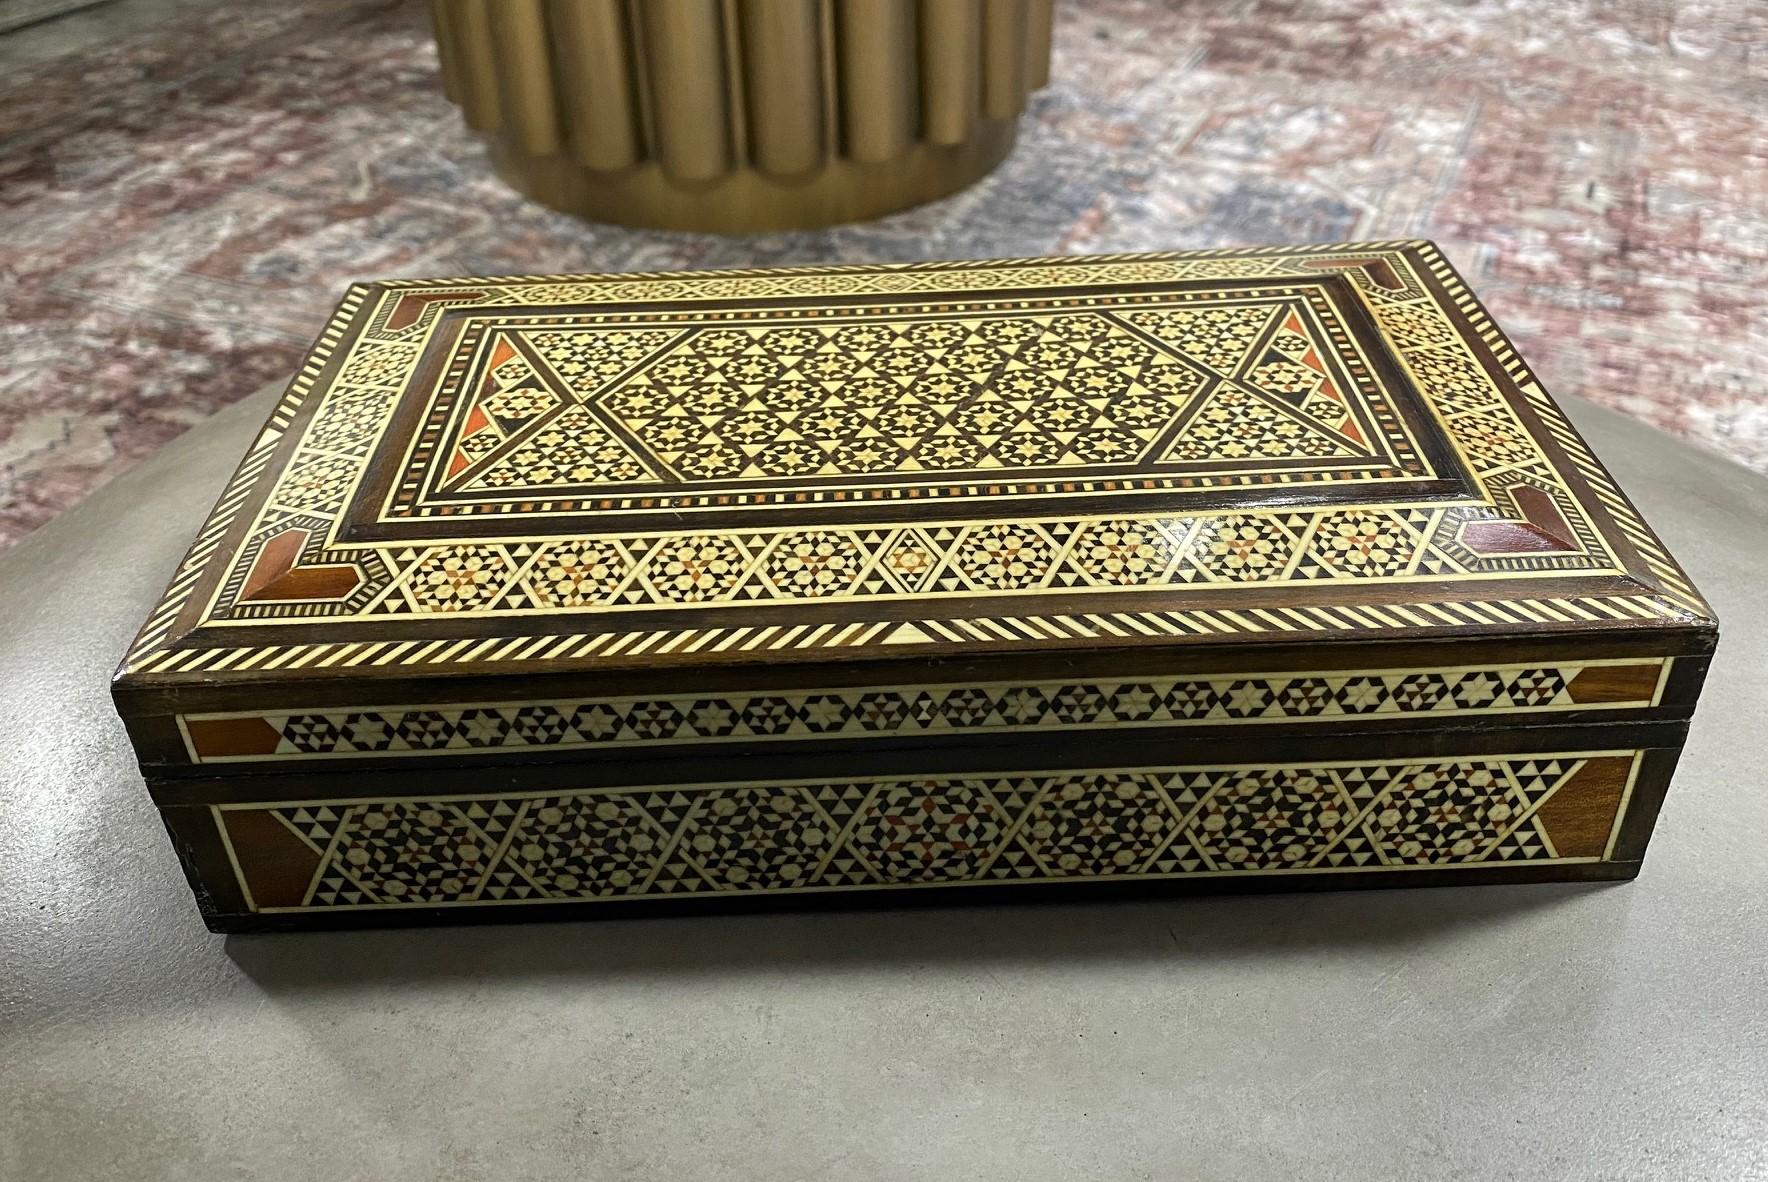 Stunning mosaic design, this intricate wood box is made from multiple micro pieces of wood with some possible bone inlays. Gorgeous craftsmanship. A true work of art.

Would be a great addition to any decorative art box or jewelry box collection